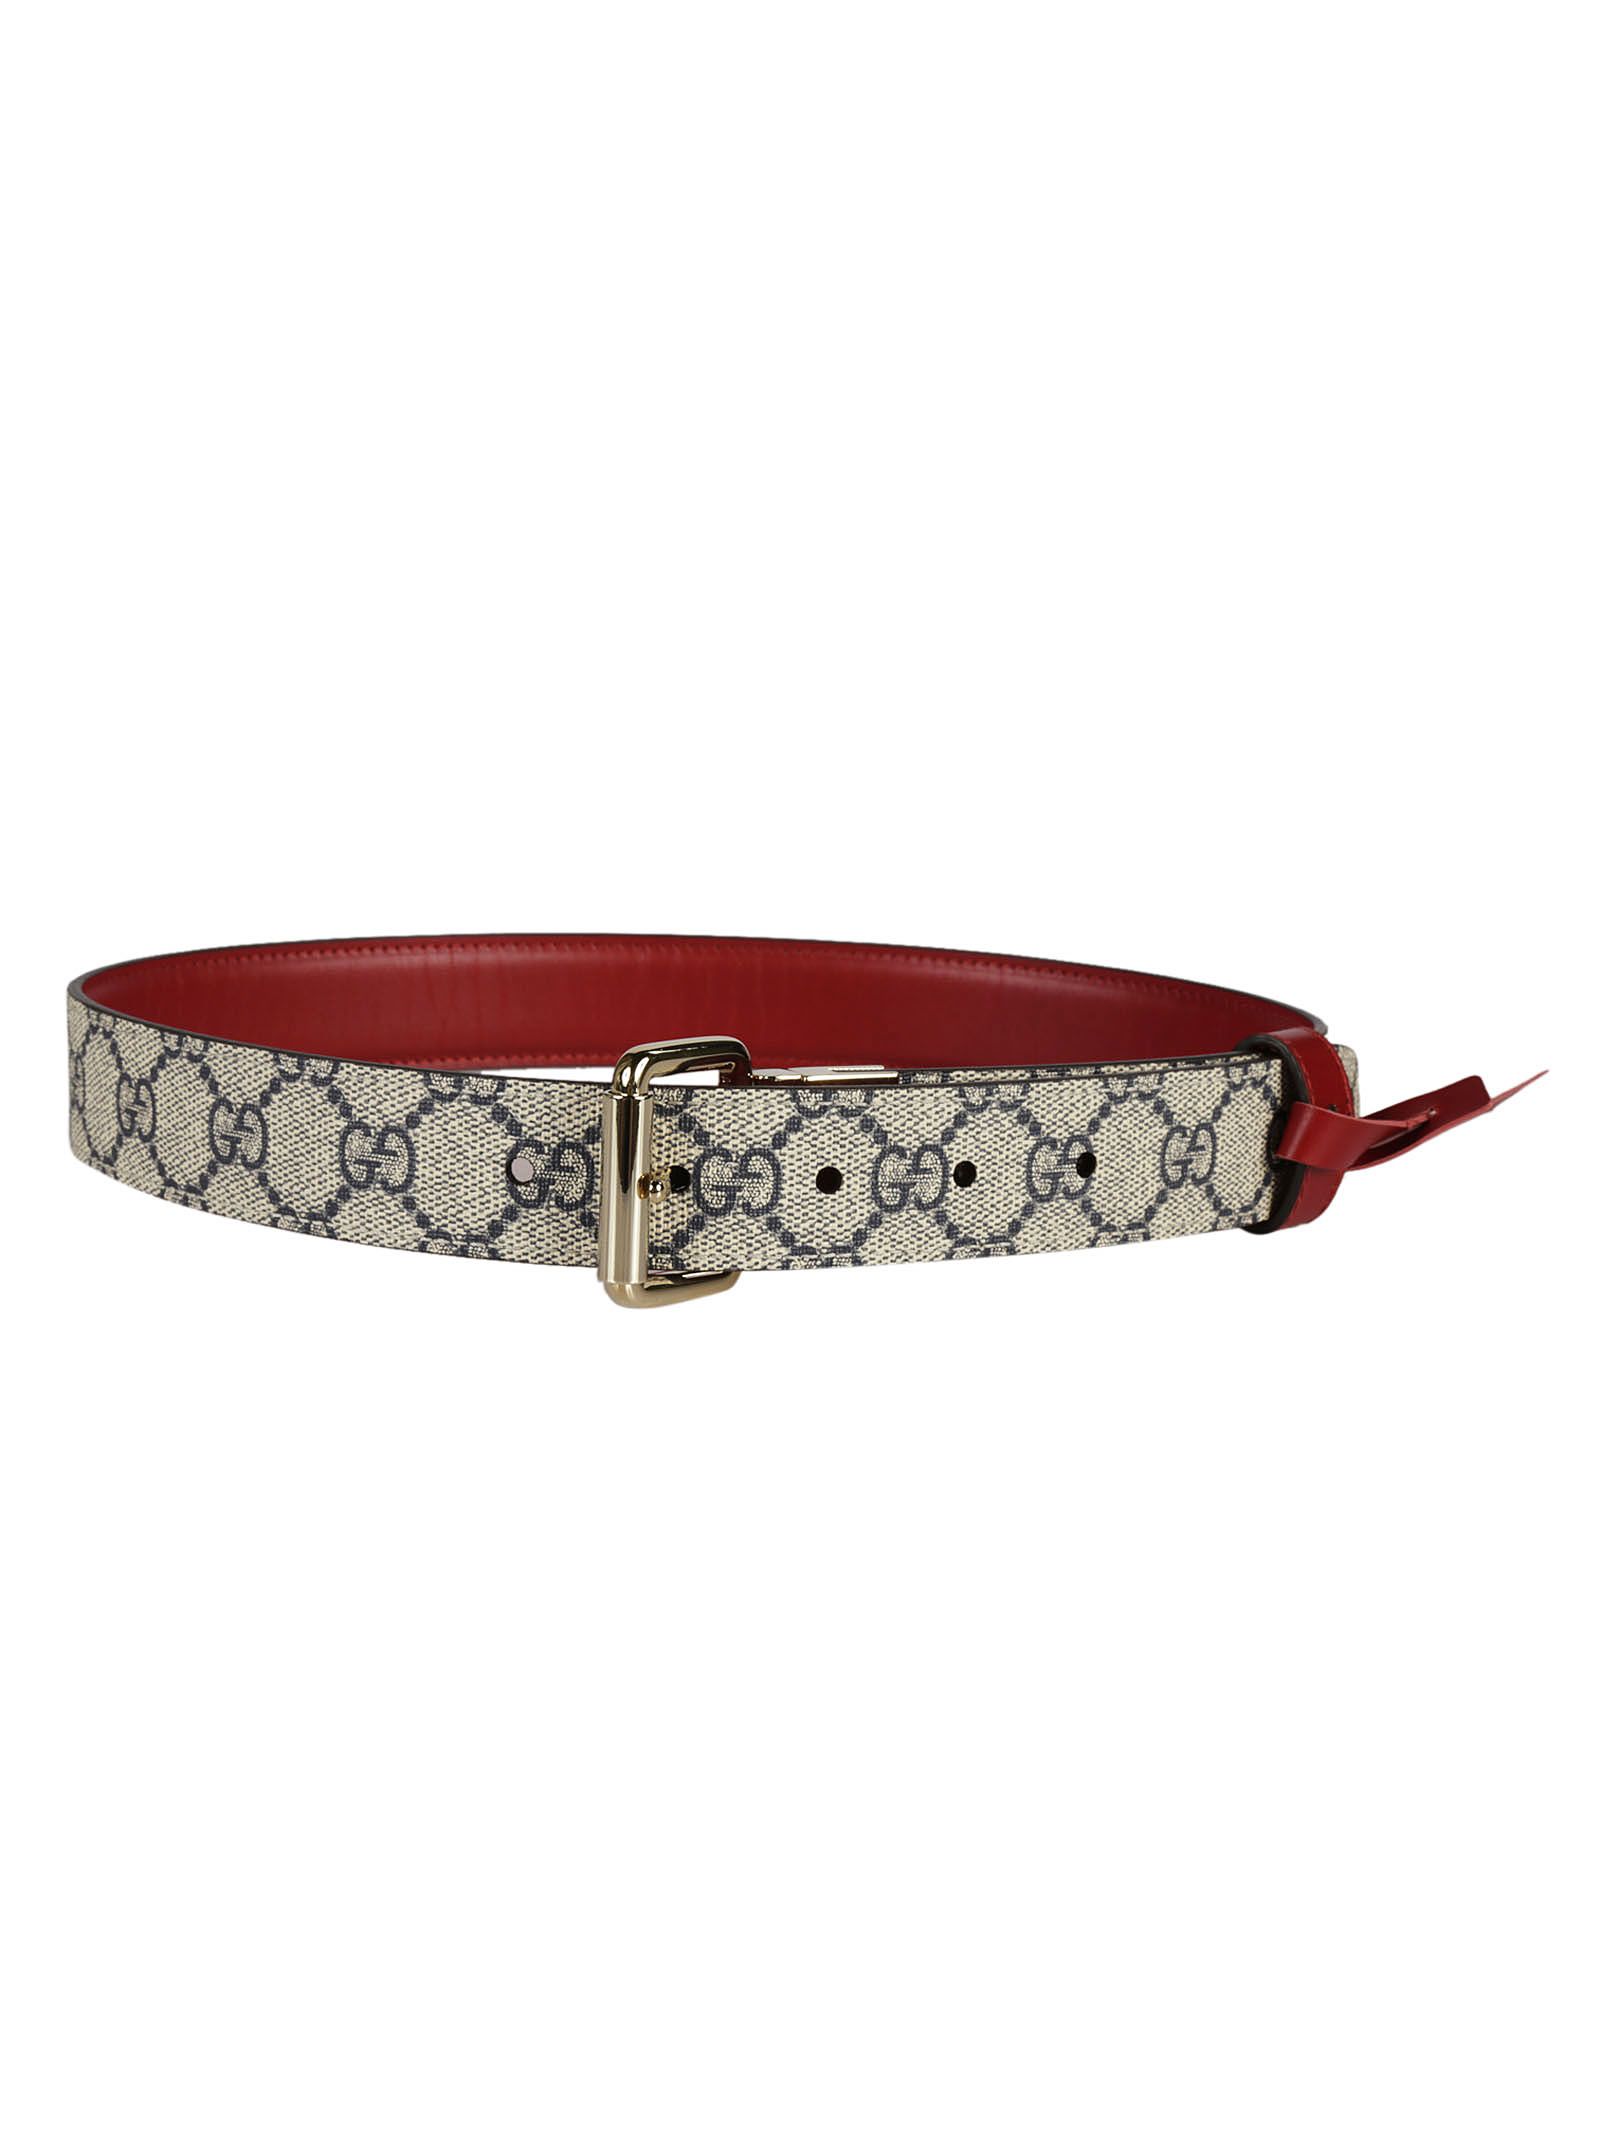 Gucci Gucci Reversible Leather and GG Supreme Belt - Beige/Red - 6303801 | italist